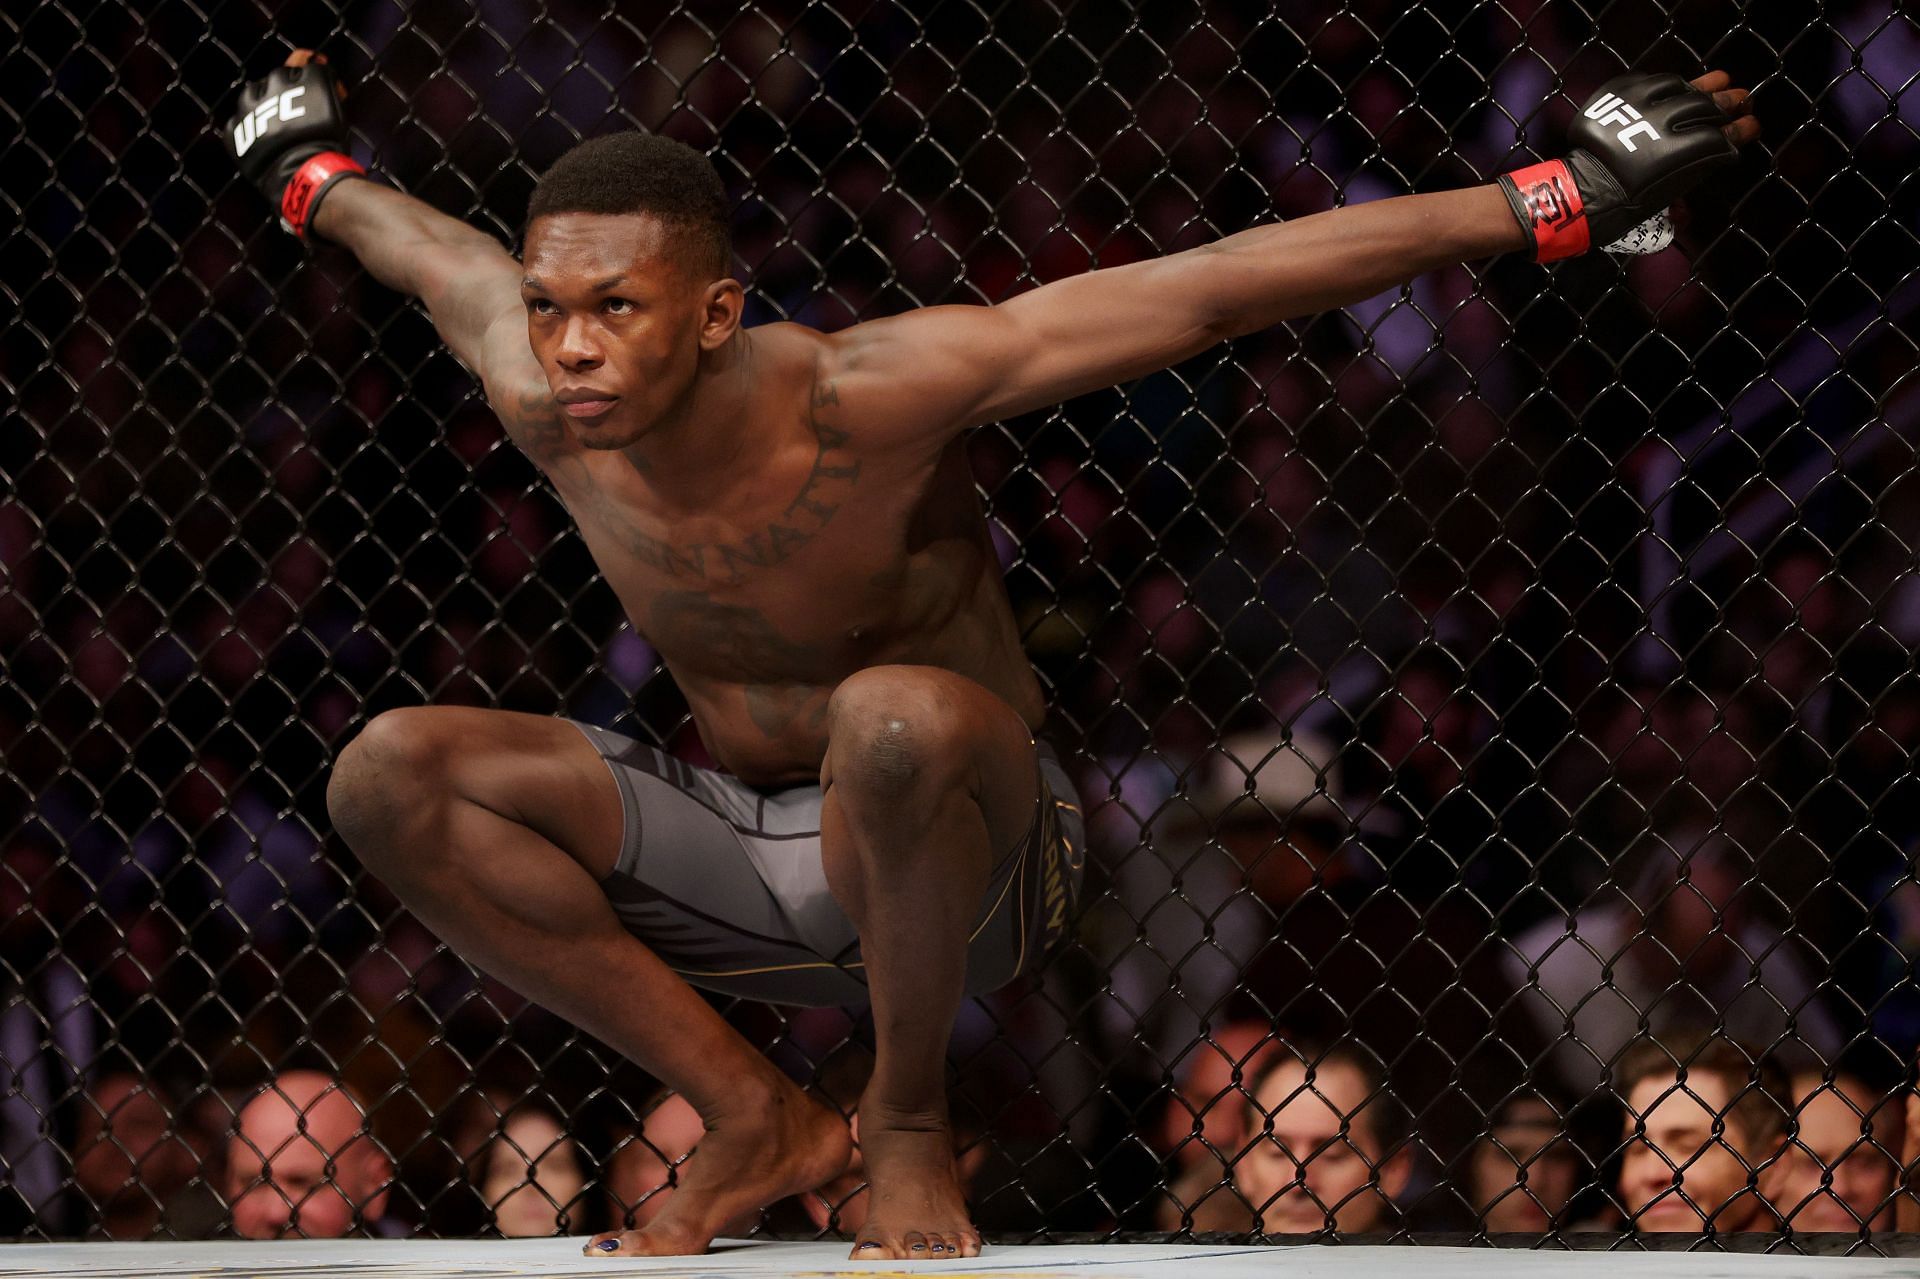 Is Israel Adesanya vs. Jon Jones the most significant possible fight in the UFC?